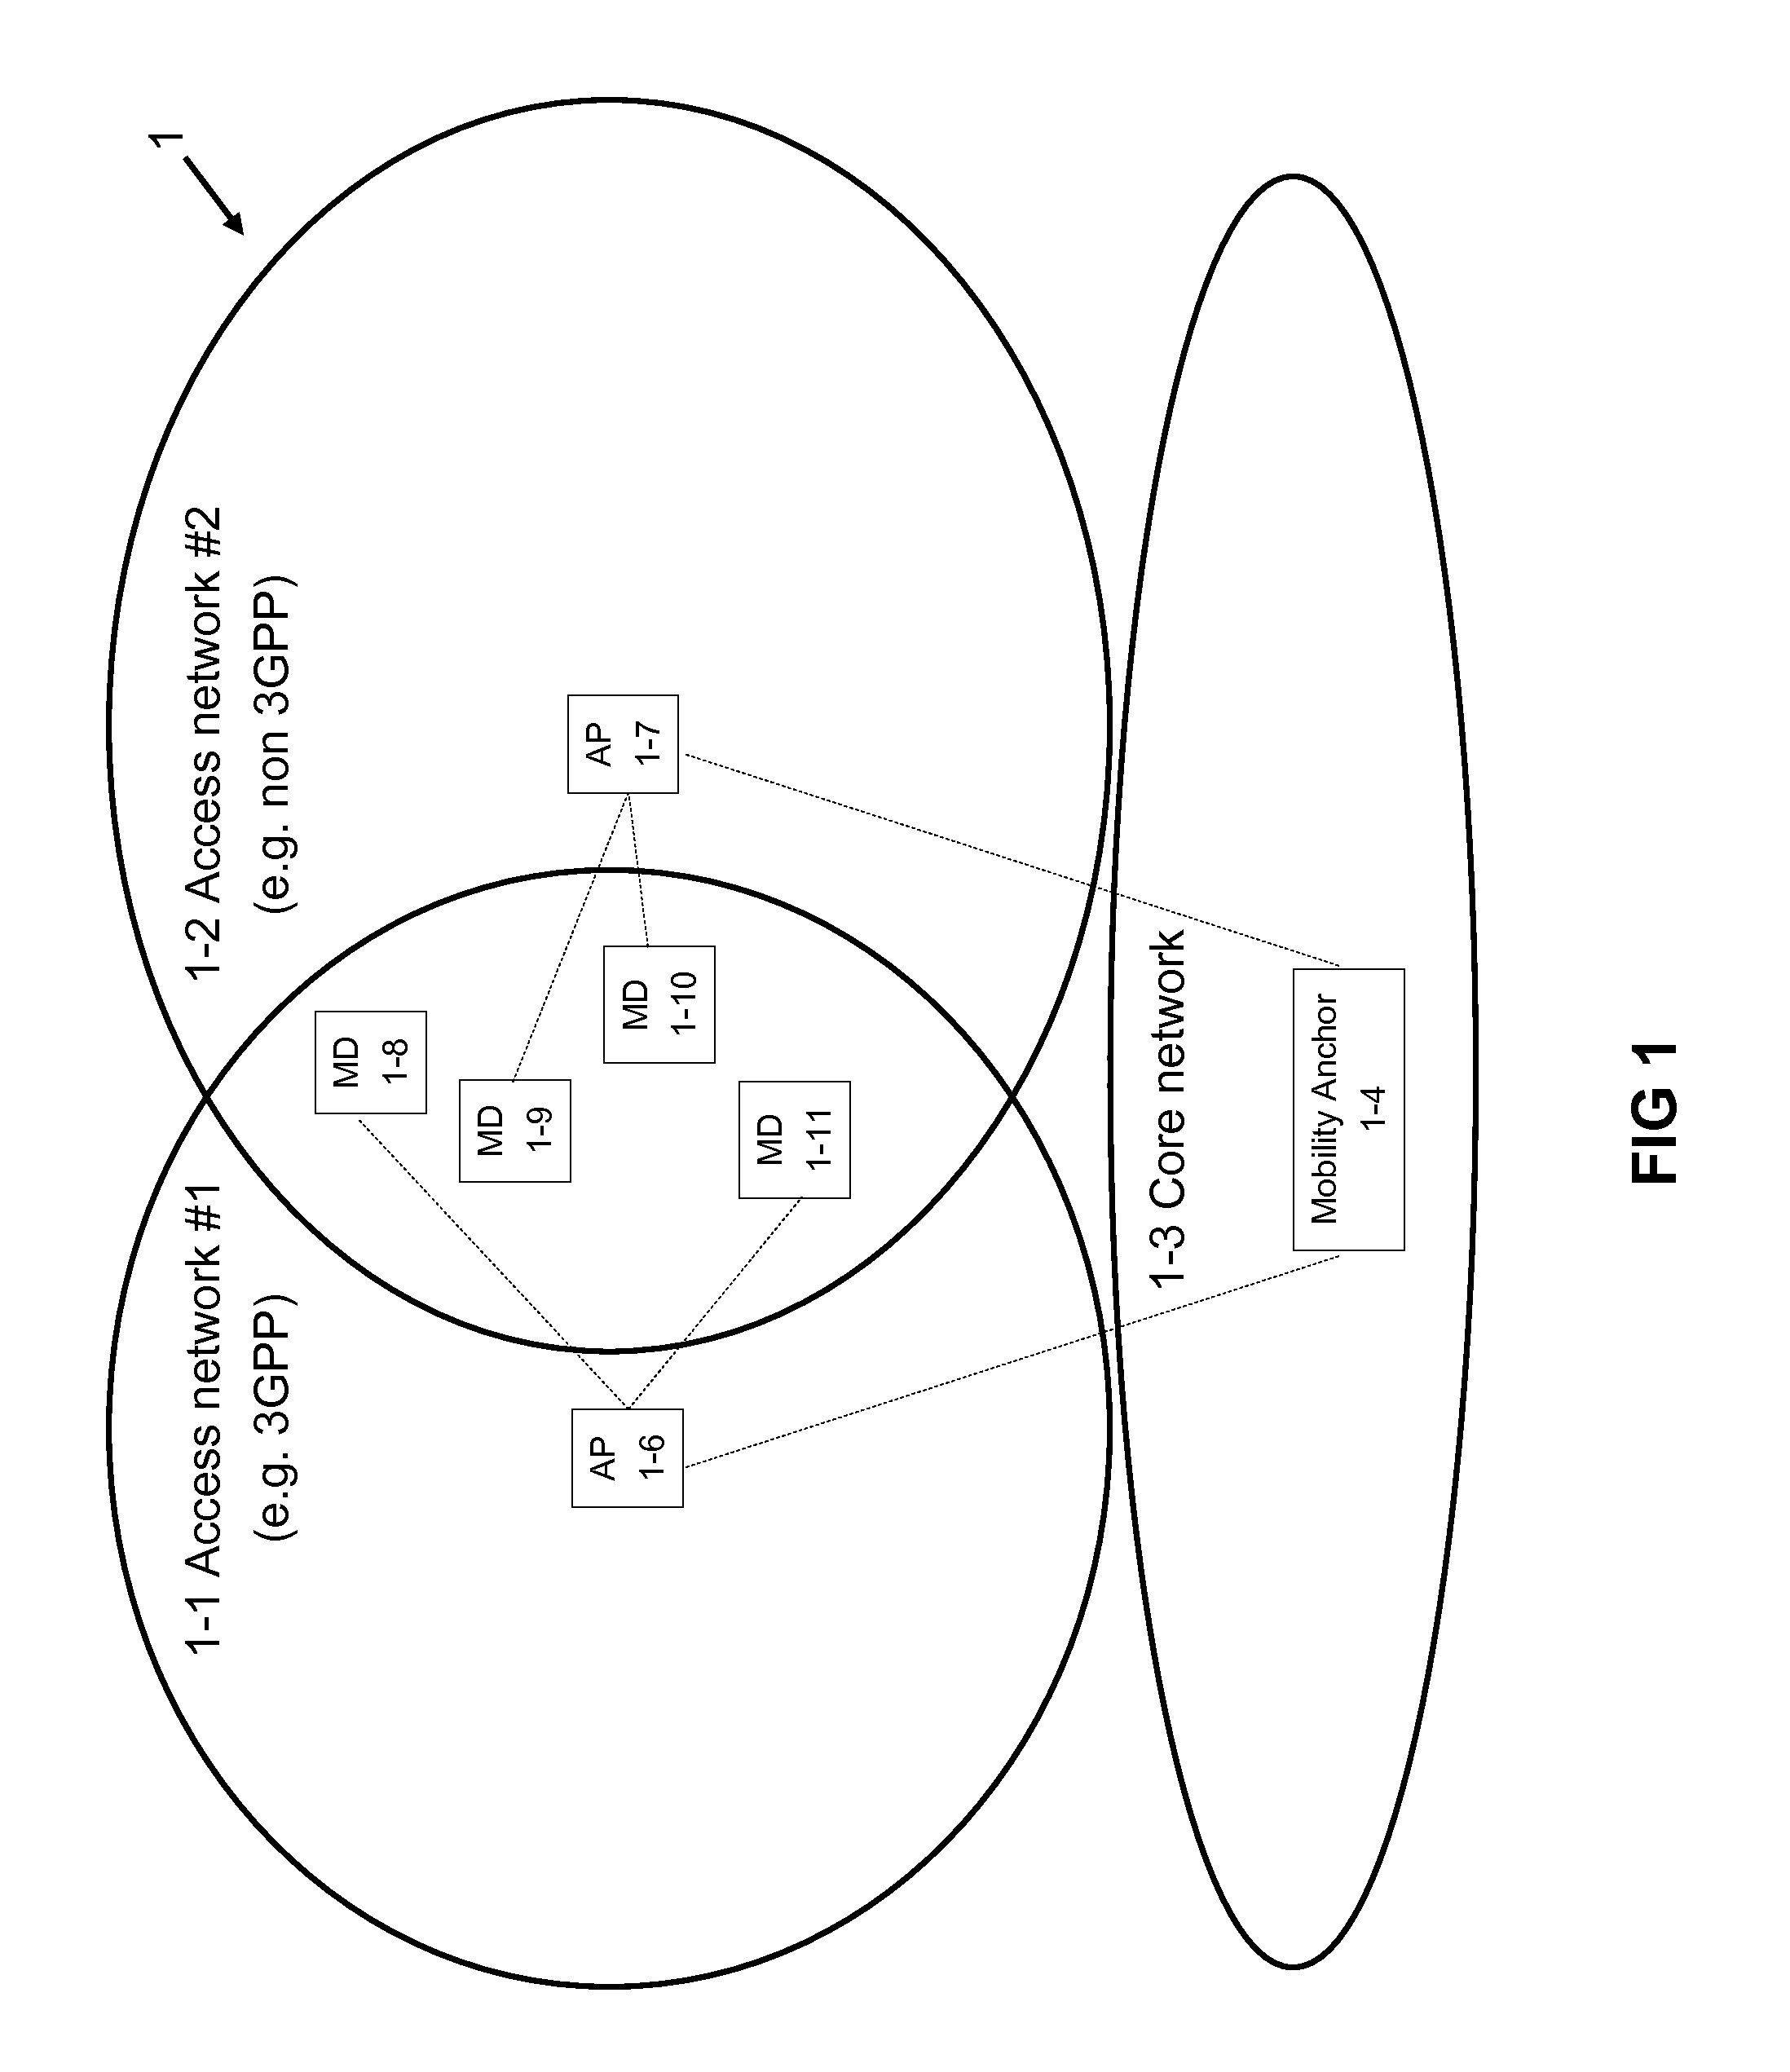 Method, apparatus and related computer program for detecting changes to a network connection